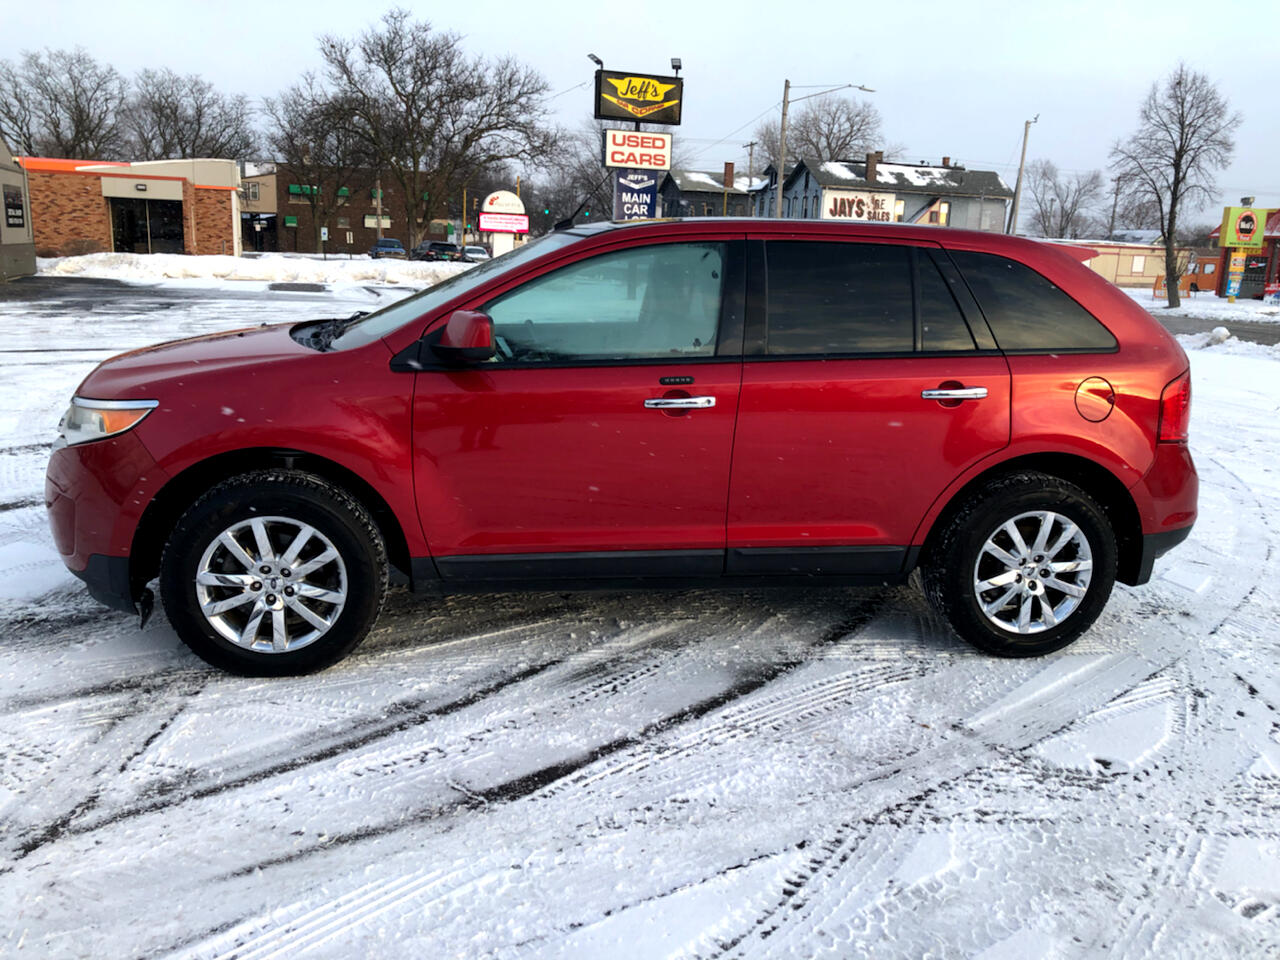 2011 Ford Edge 4dr SEL FWD